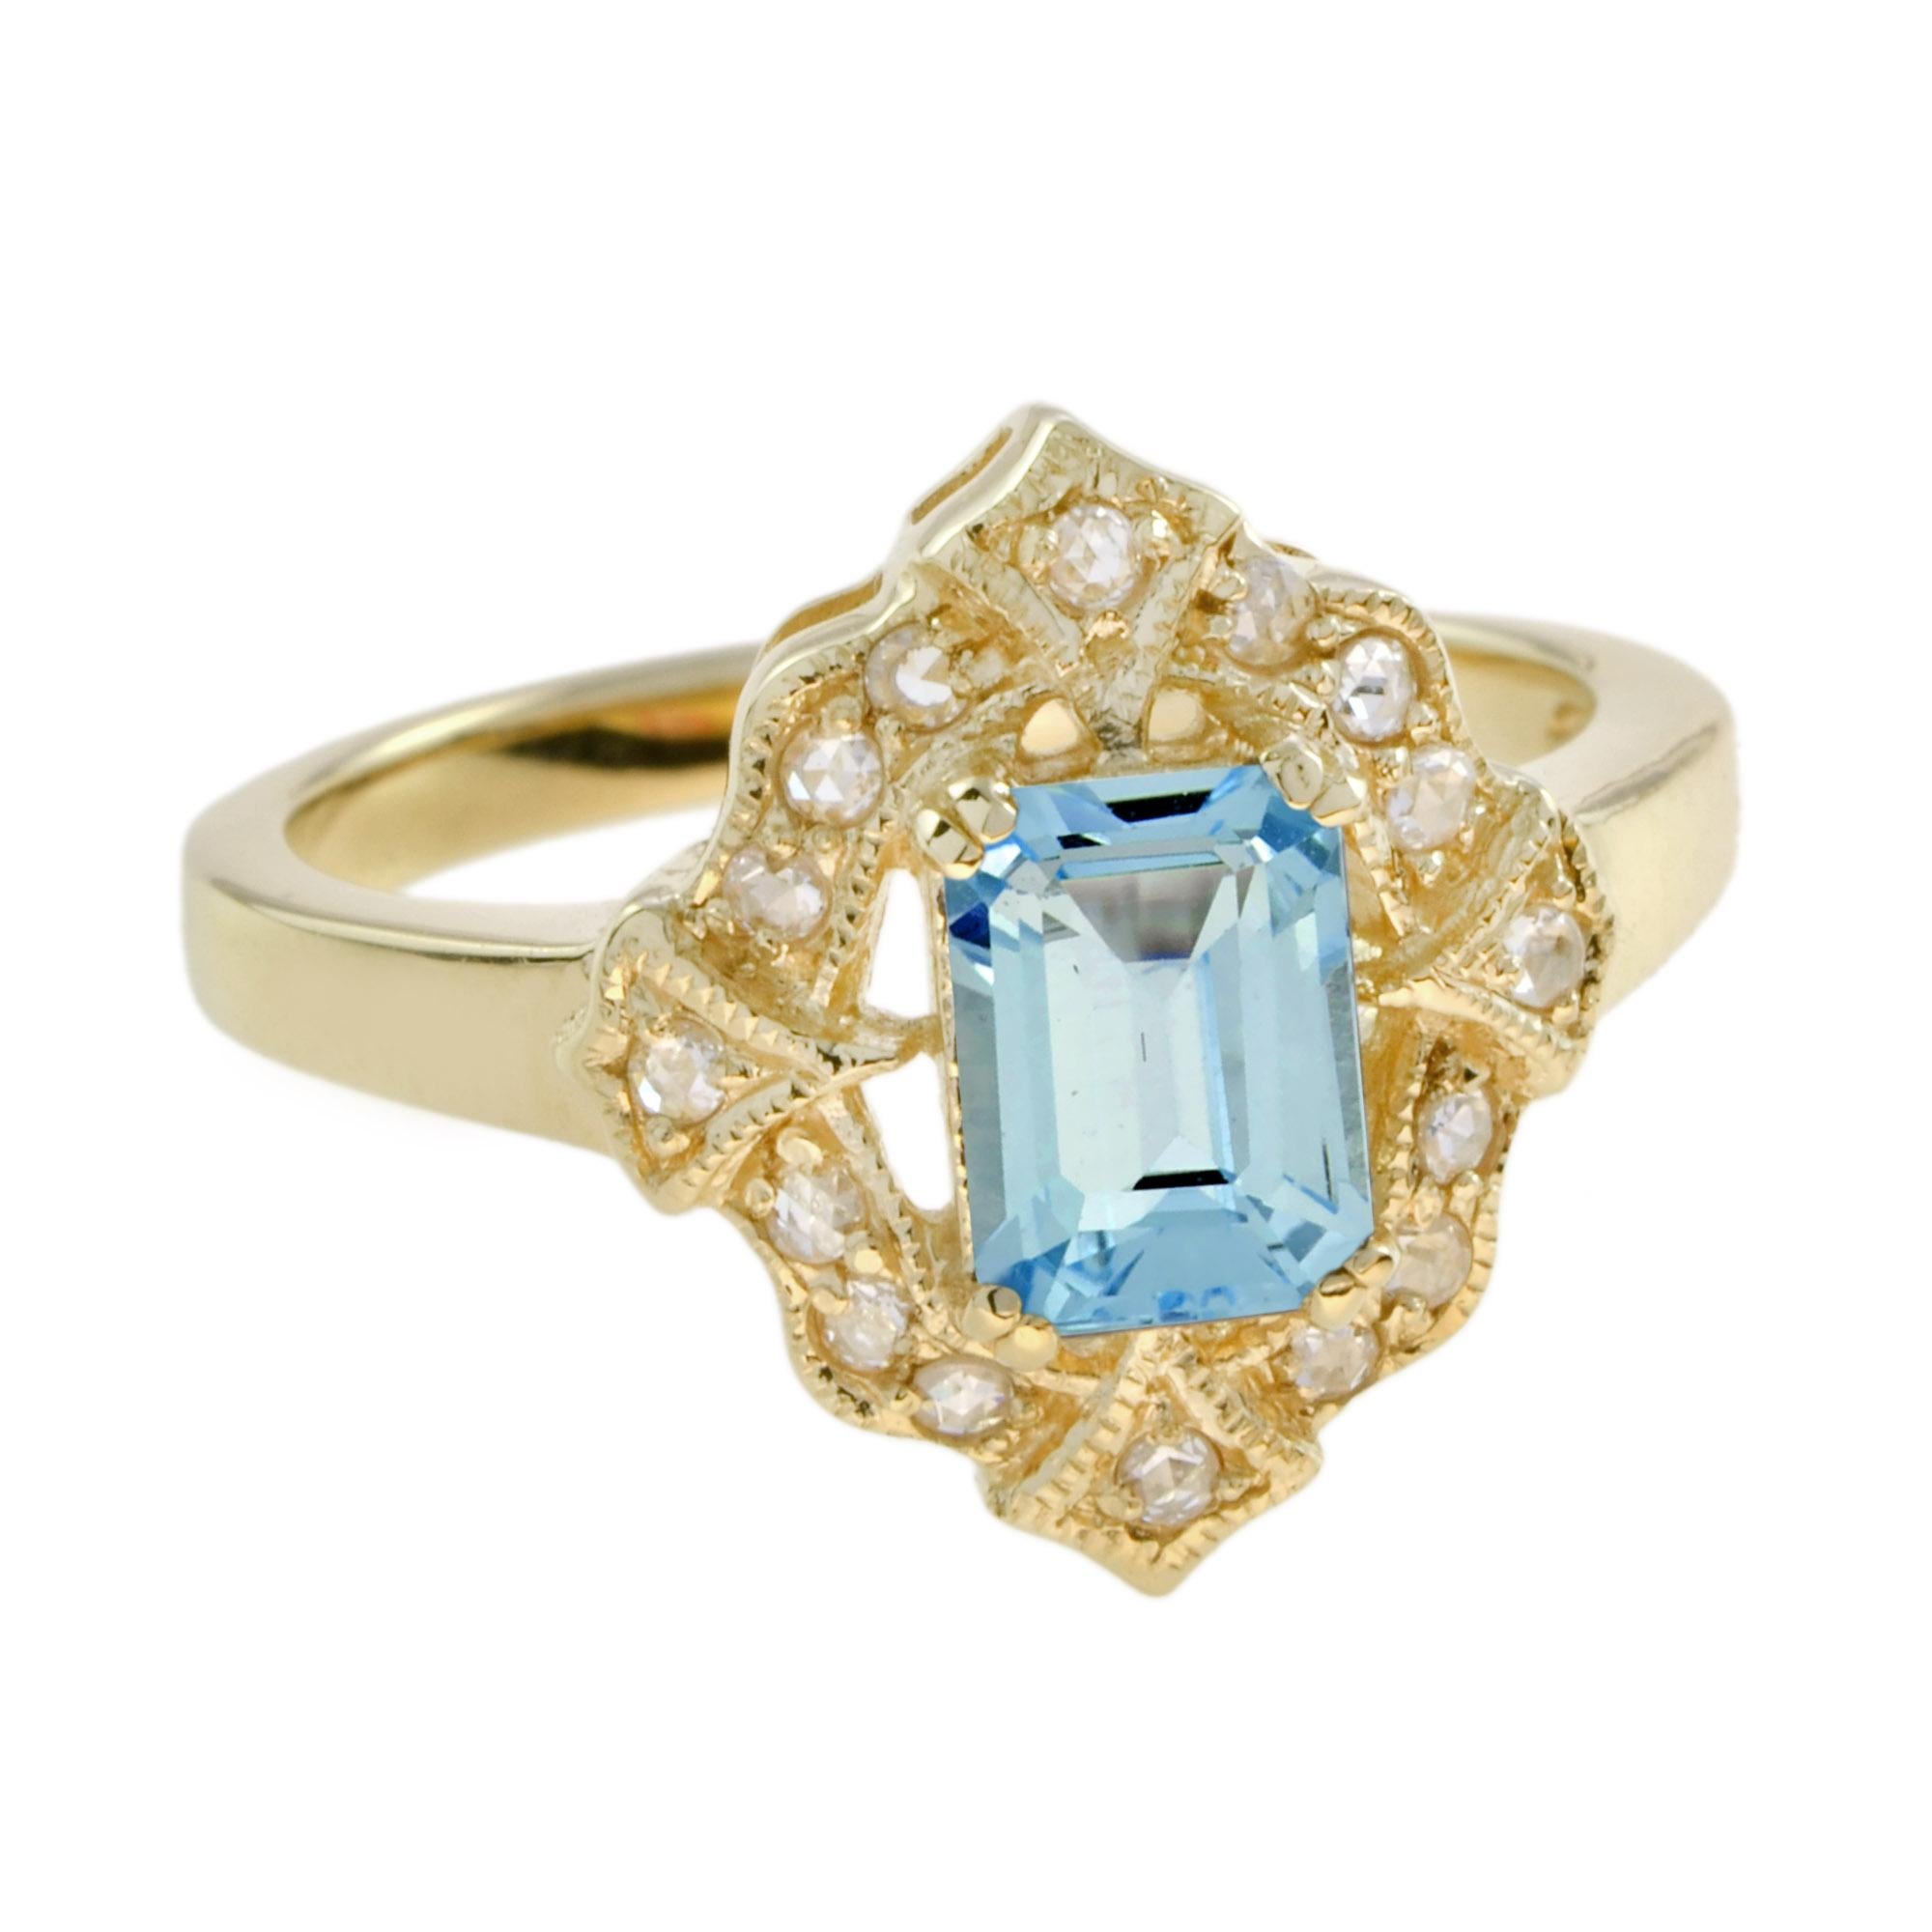 For Sale:  Emerald Cut Blue Topaz and Diamond Halo Vintage Style Ring in 14K Yellow Gold 6